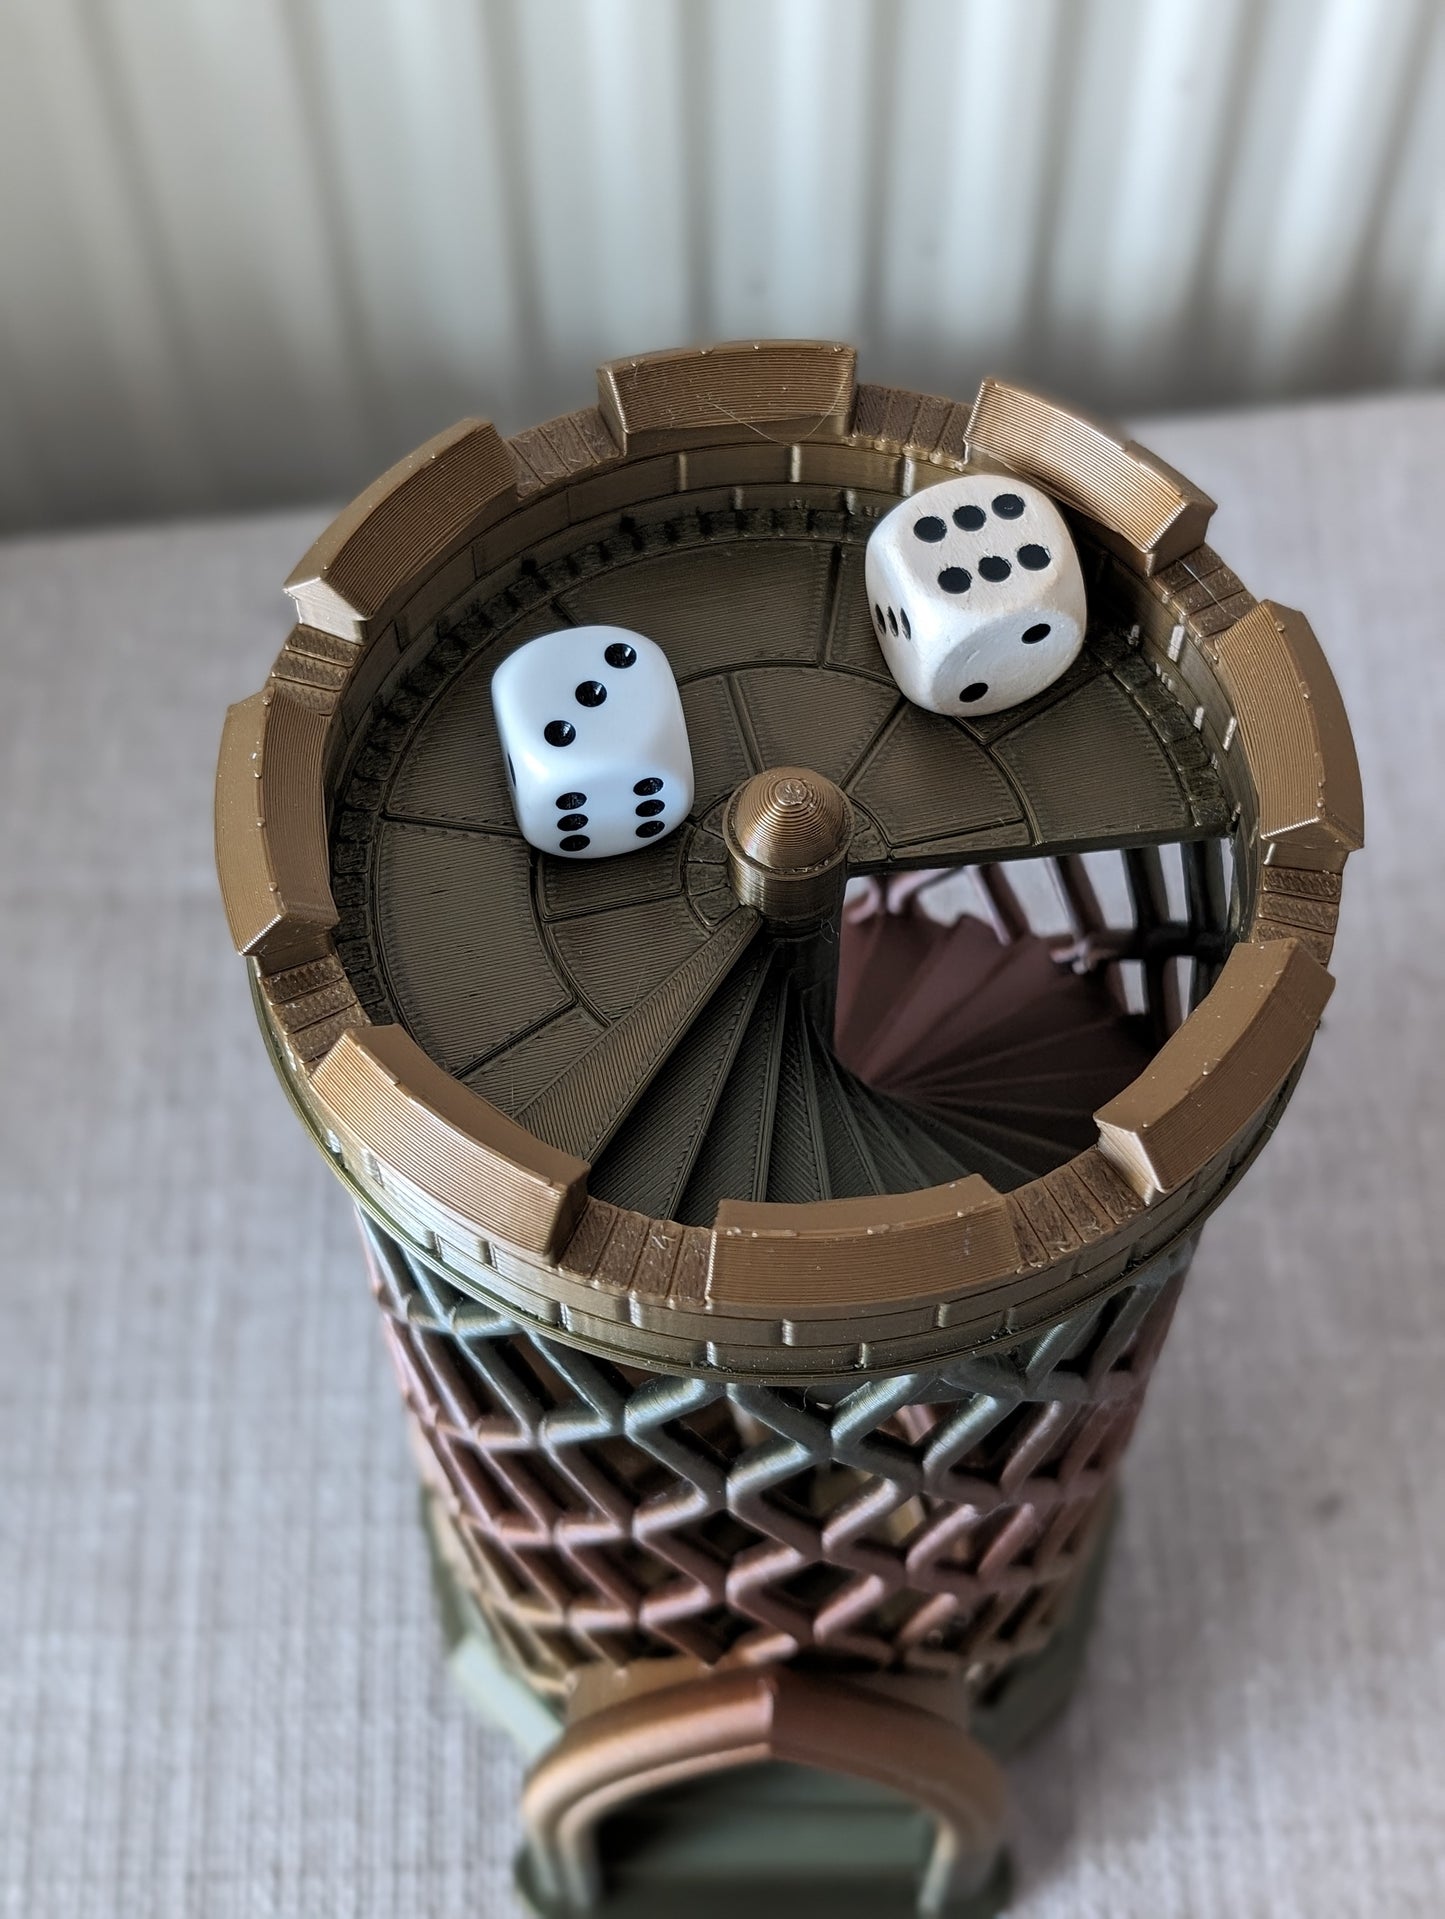 Castle turret dice tower from the top without dice catcher